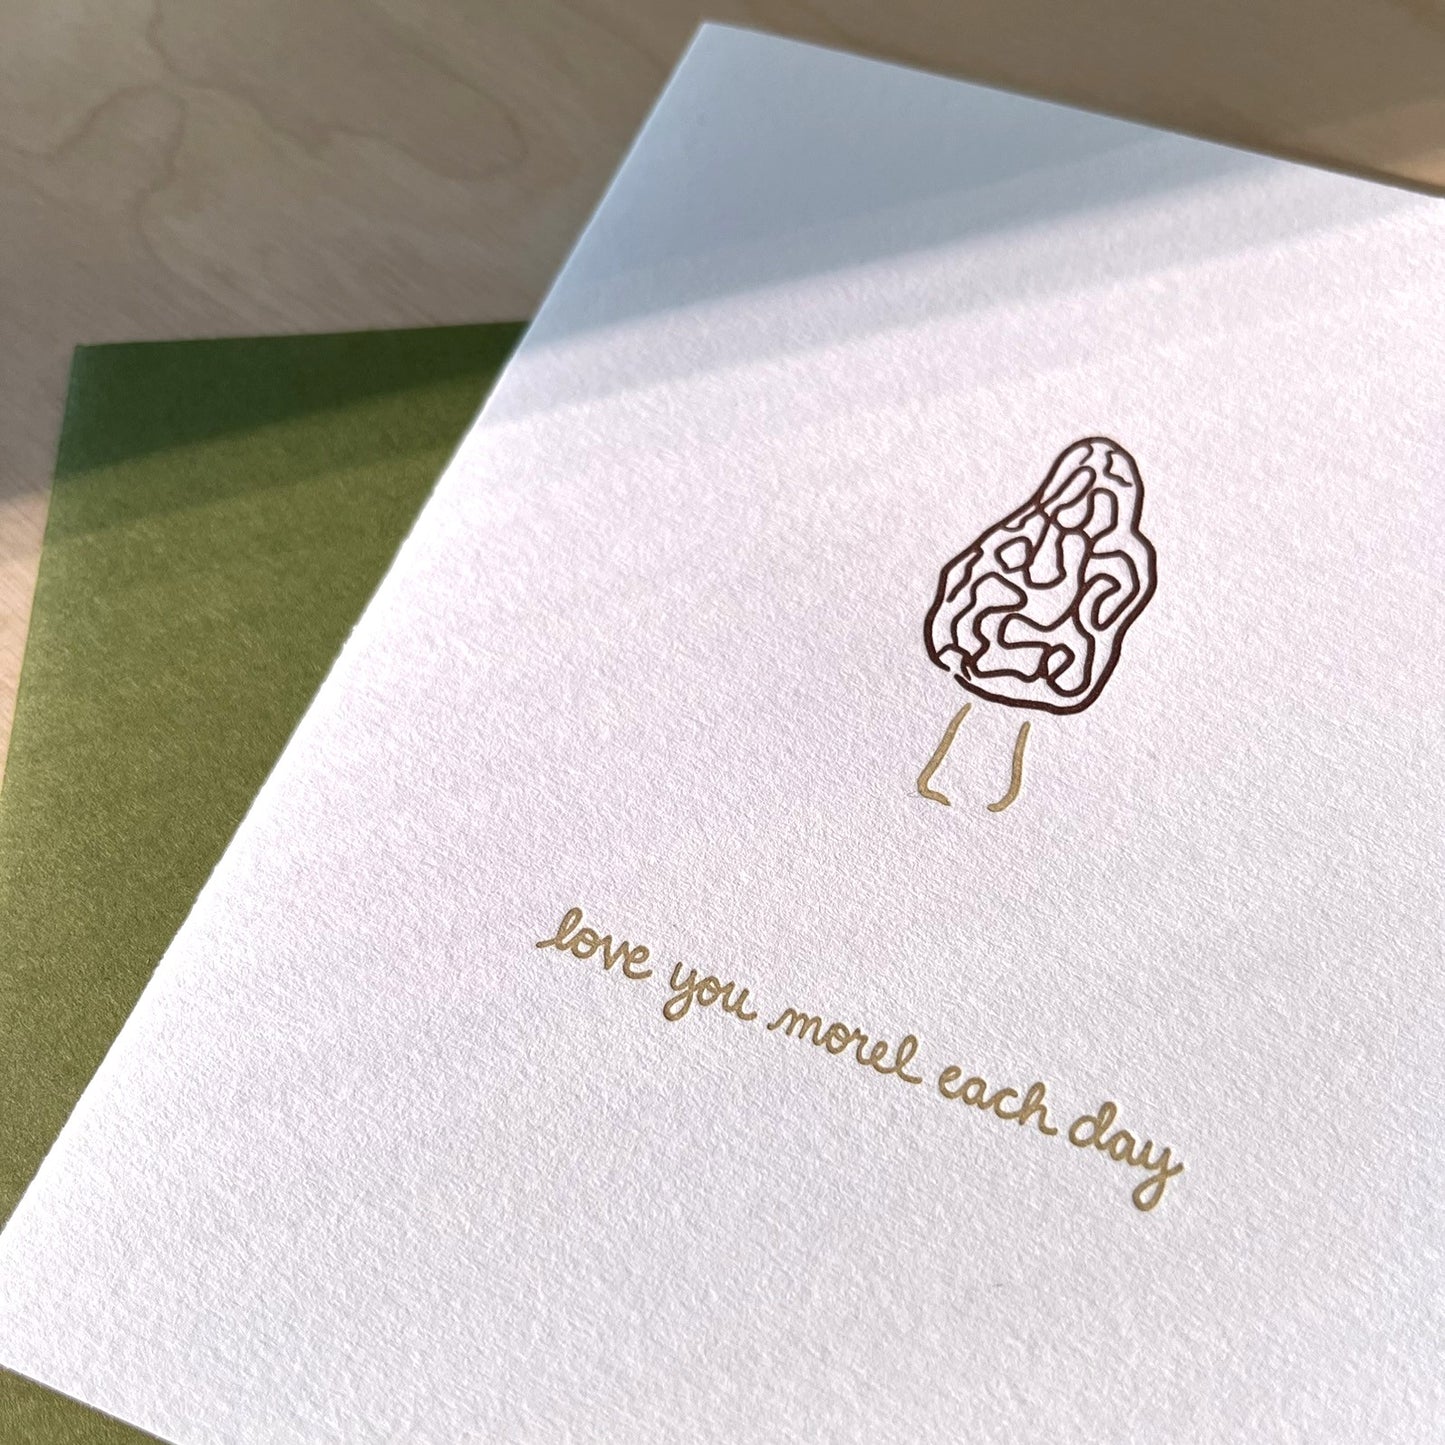 Greeting Card - Love You Morel Each Day